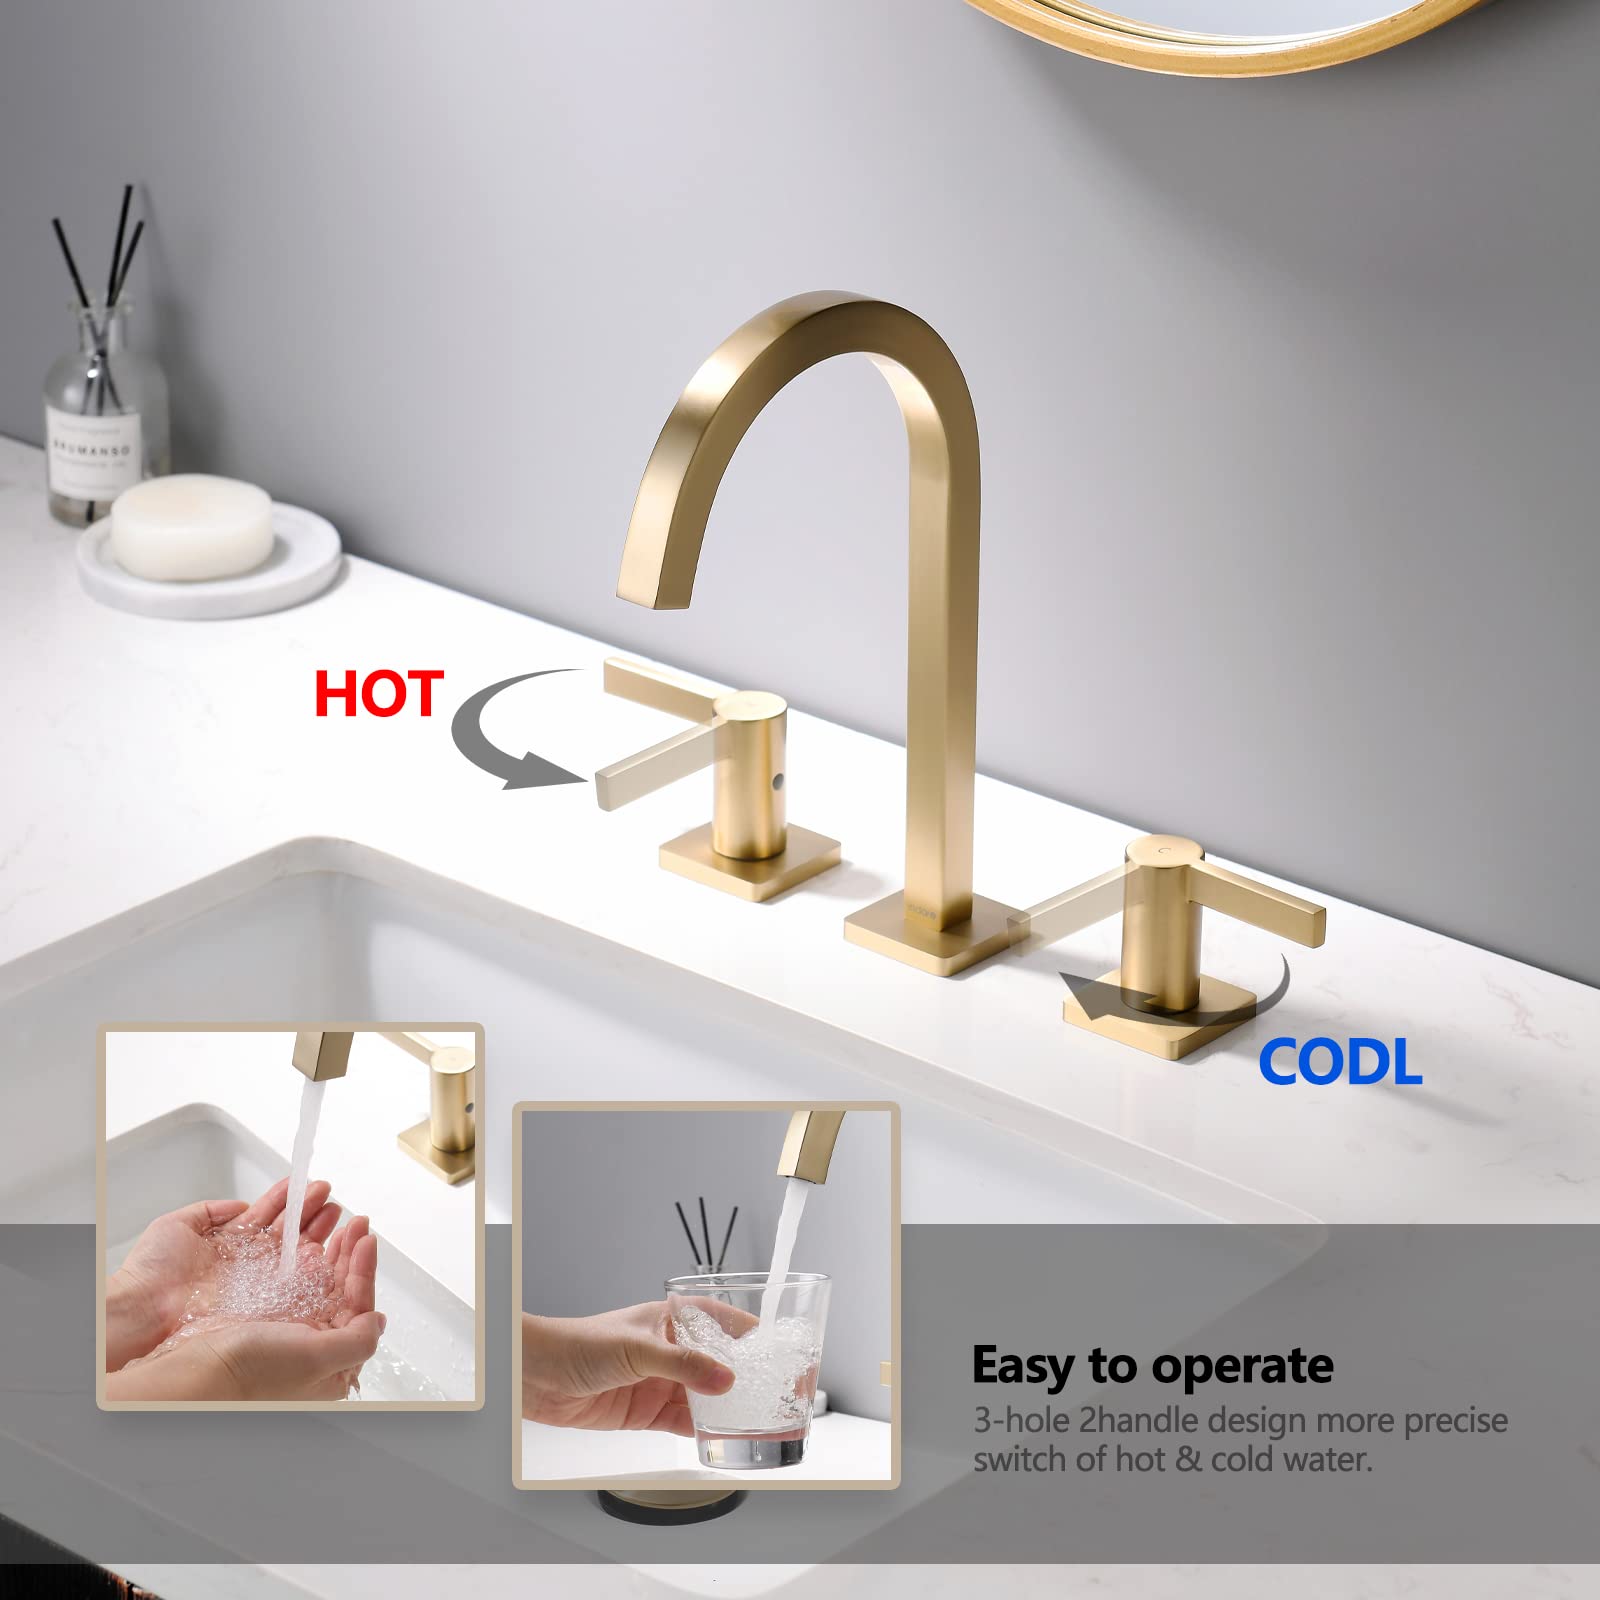 indare Brushed Gold Bathroom Faucet, 8 Inch Brass Widespread Bathroom Sink Faucet 3 Holes, Two Handles Bathroom Sink Faucet with Pop-Up Drain & Supply Lines, 110104-BG